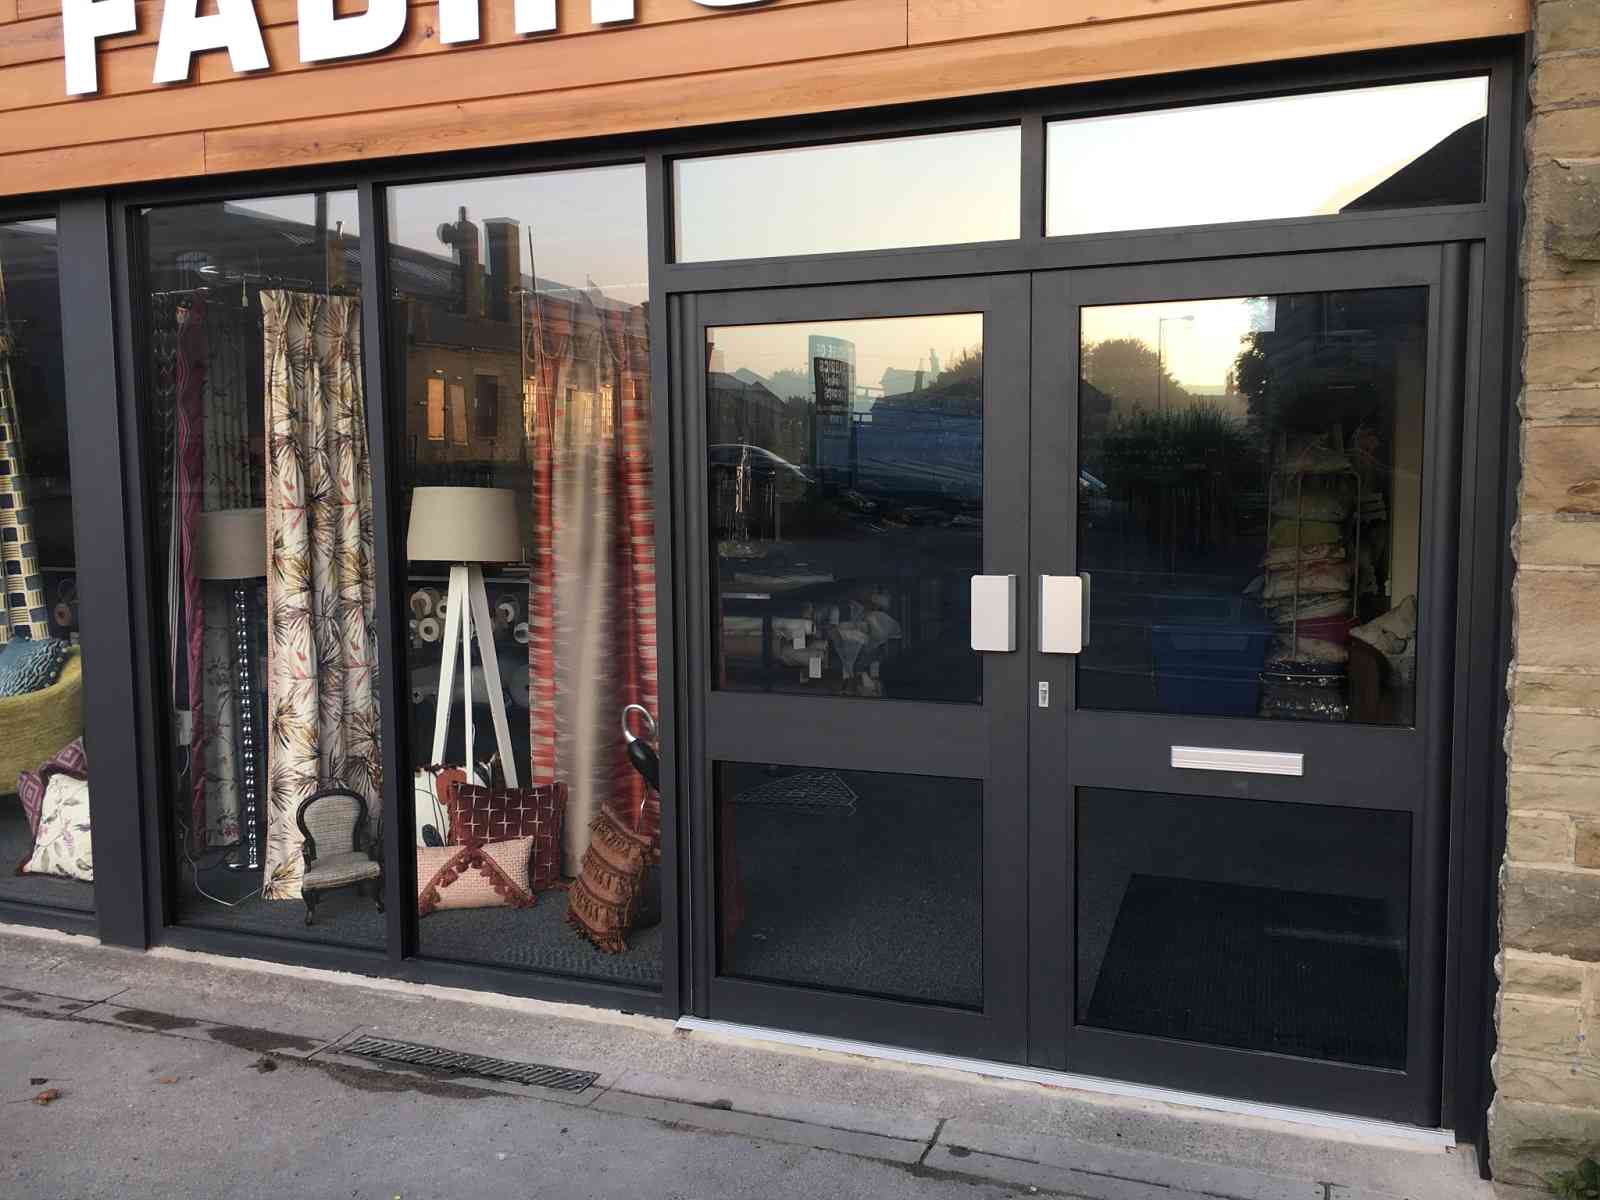 New secure aluminium shopfront double doors at commercial property Saltaire, Shipley in West Yorkshire